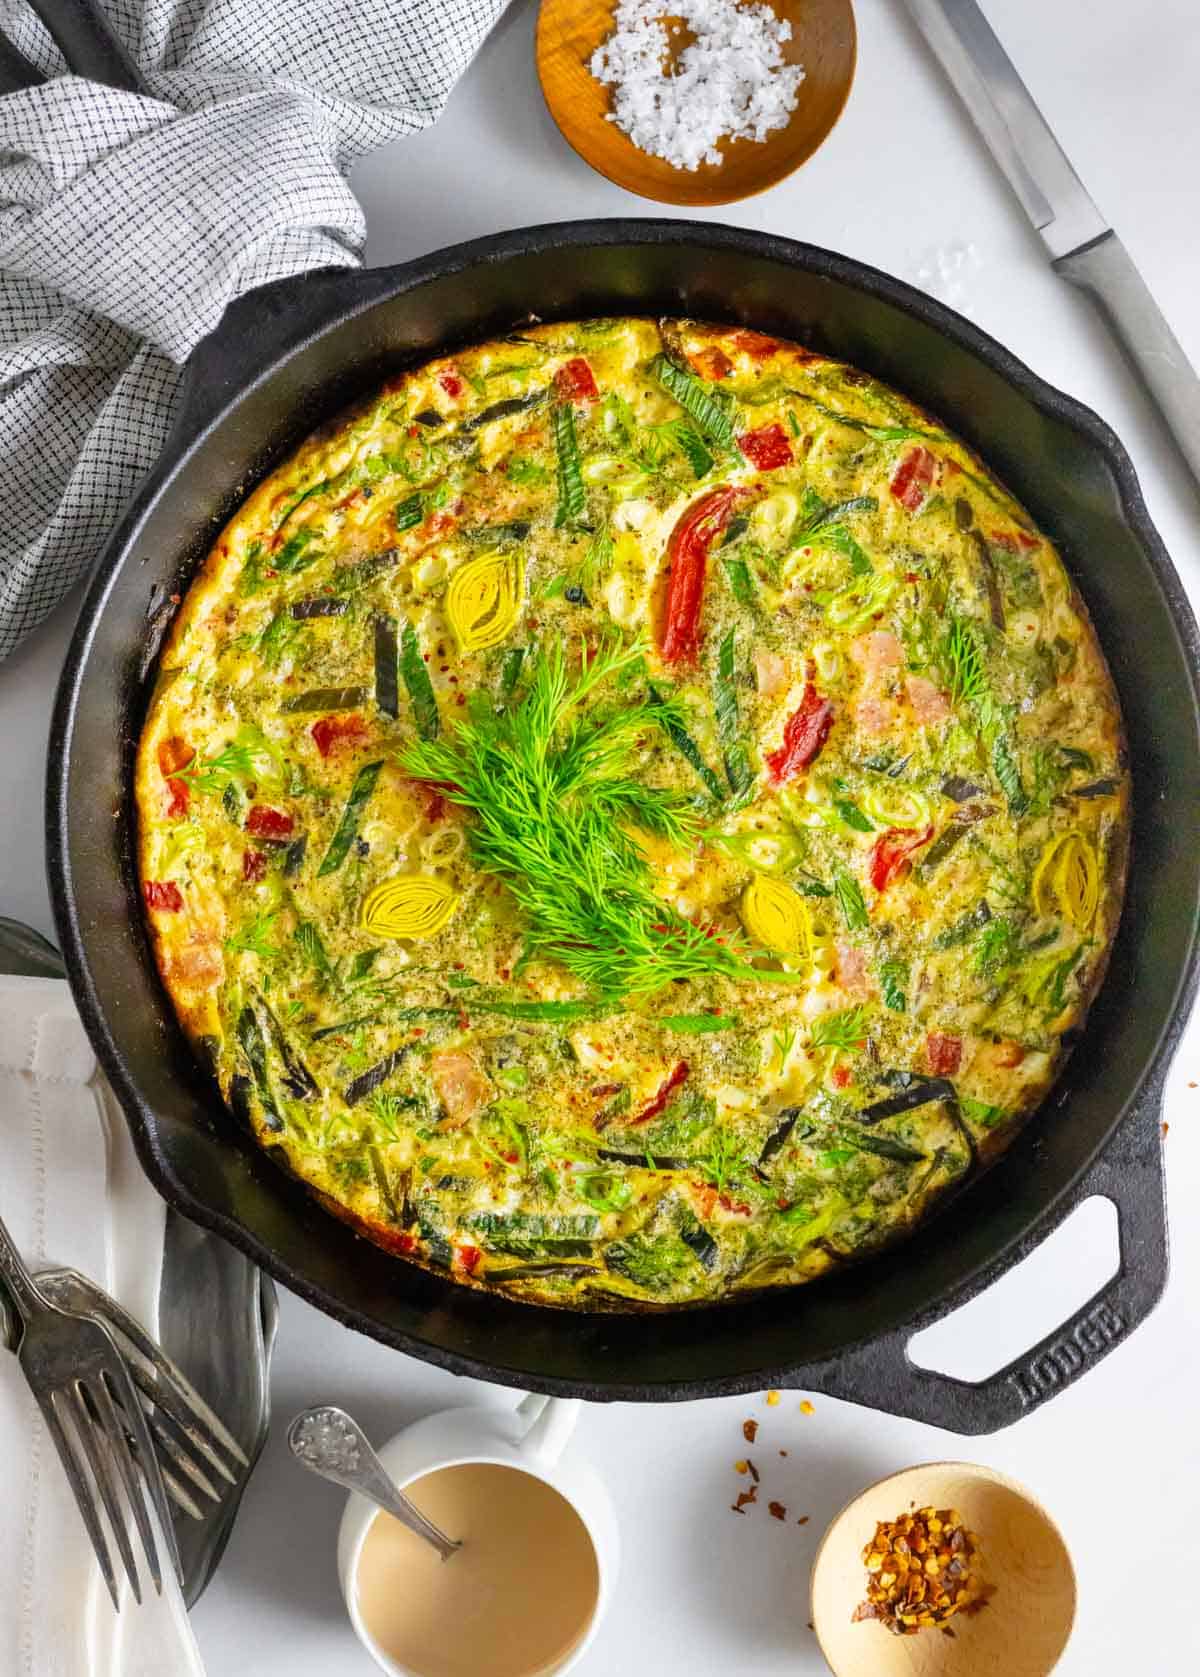 Baked frittata garnished with fresh dill in a cast iron skillet.